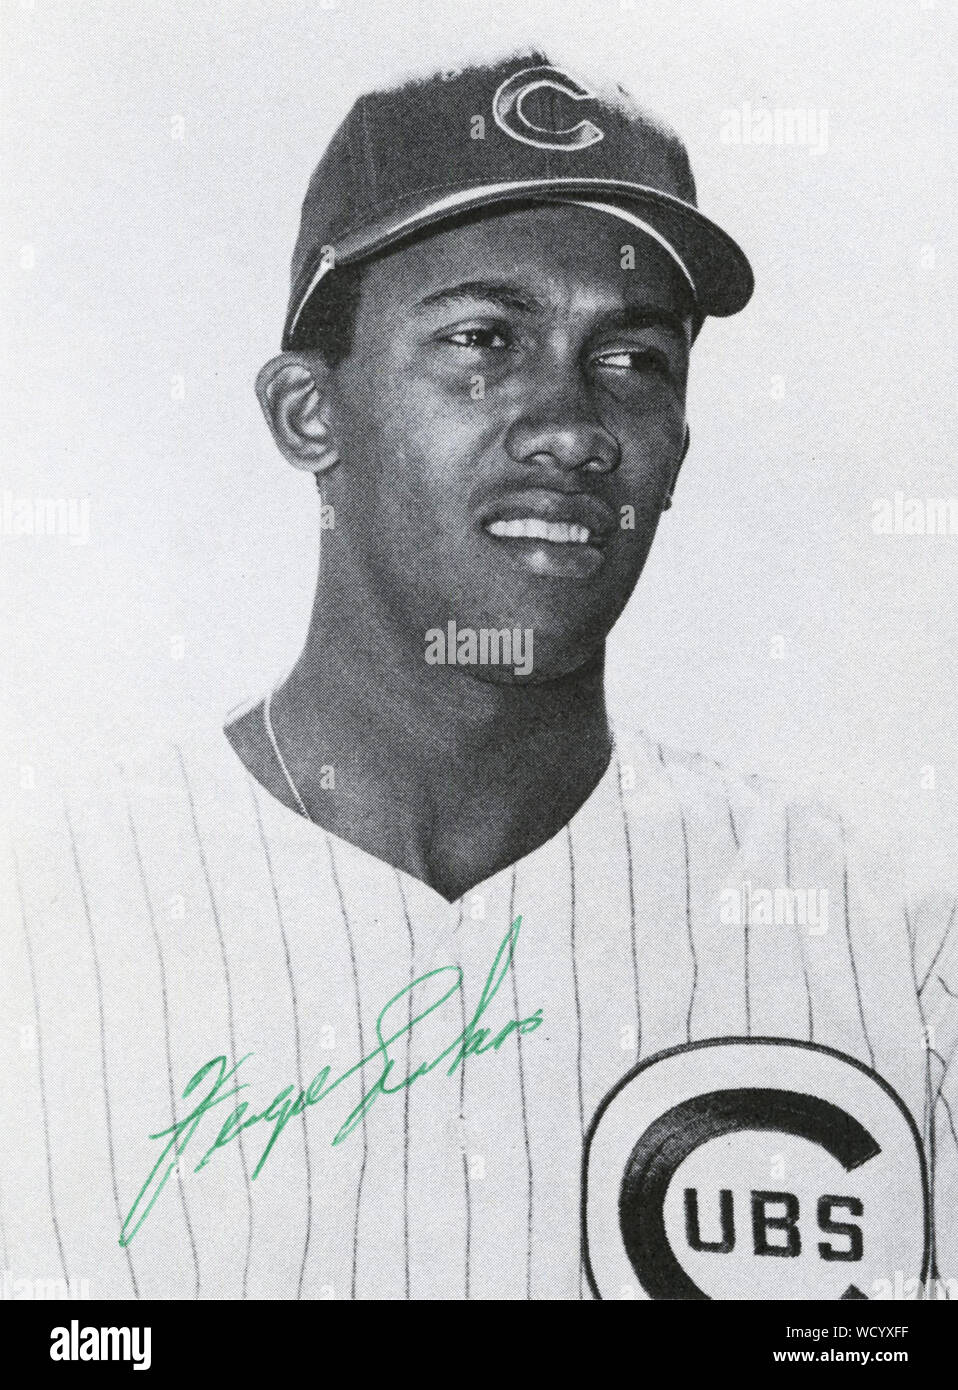 Fergie Jenkins  was a star baseball player with the Chicago Cubs and other teams in the 1960s through 1980s. Stock Photo